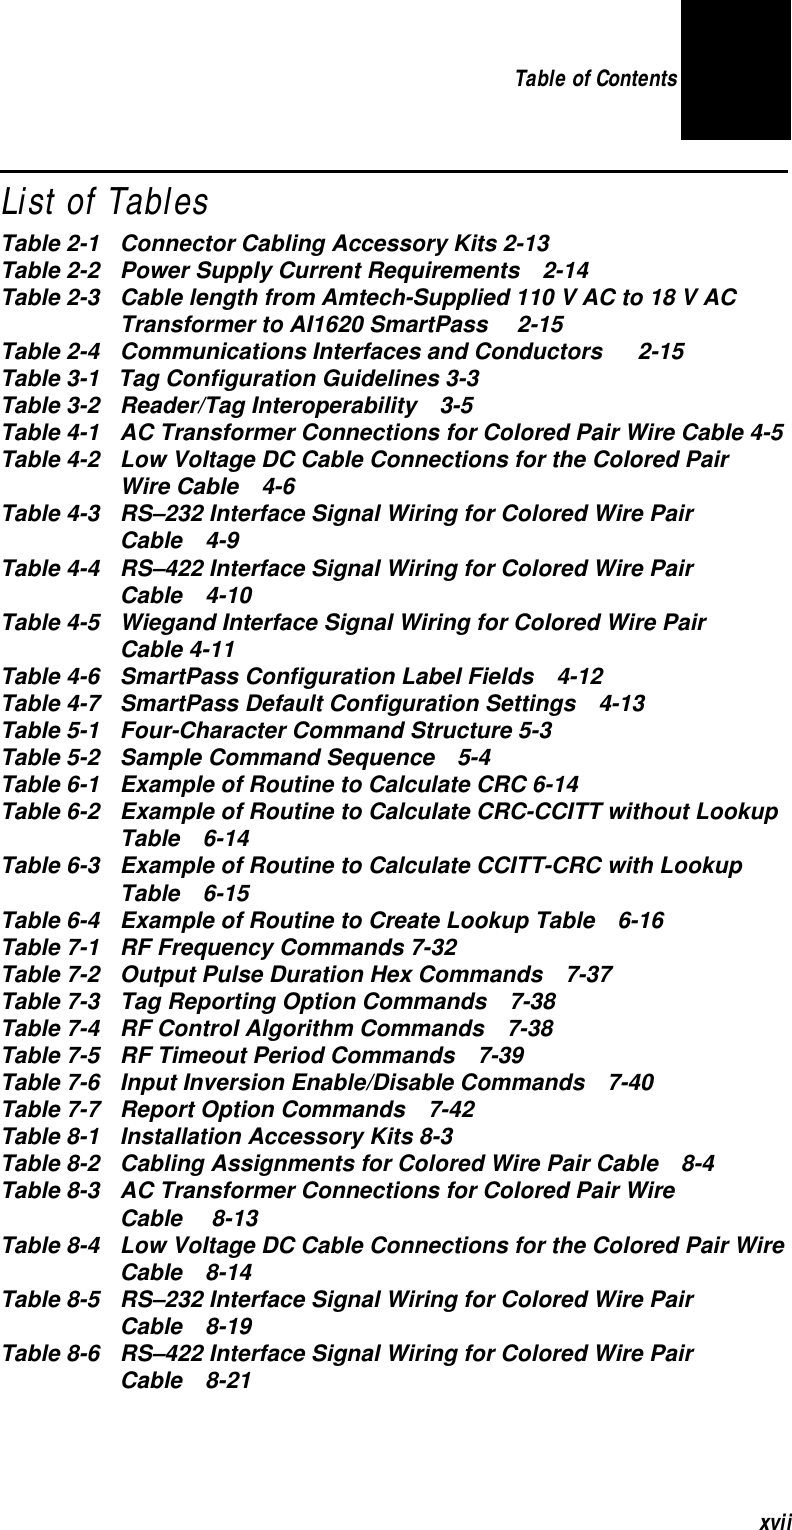 Table of Contents xviiList of TablesTable 2-1 Connector Cabling Accessory Kits 2-13Table 2-2 Power Supply Current Requirements2-14Table 2-3 Cable length from Amtech-Supplied 110 V AC to 18 V ACTransformer to AI1620 SmartPass2-15Table 2-4 Communications Interfaces and Conductors 2-15Table 3-1   Tag Configuration Guidelines 3-3Table 3-2 Reader/Tag Interoperability3-5Table 4-1 AC Transformer Connections for Colored Pair Wire Cable 4-5Table 4-2  Low Voltage DC Cable Connections for the Colored Pair Wire Cable4-6Table 4-3 RS–232 Interface Signal Wiring for Colored Wire Pair Cable4-9Table 4-4 RS–422 Interface Signal Wiring for Colored Wire Pair Cable4-10Table 4-5 Wiegand Interface Signal Wiring for Colored Wire Pair Cable 4-11Table 4-6  SmartPass Configuration Label Fields4-12Table 4-7 SmartPass Default Configuration Settings4-13Table 5-1 Four-Character Command Structure 5-3Table 5-2 Sample Command Sequence5-4Table 6-1   Example of Routine to Calculate CRC 6-14Table 6-2 Example of Routine to Calculate CRC-CCITT without LookupTable6-14Table 6-3 Example of Routine to Calculate CCITT-CRC with LookupTable6-15Table 6-4 Example of Routine to Create Lookup Table6-16Table 7-1  RF Frequency Commands 7-32Table 7-2 Output Pulse Duration Hex Commands7-37Table 7-3 Tag Reporting Option Commands7-38Table 7-4 RF Control Algorithm Commands7-38Table 7-5  RF Timeout Period Commands7-39Table 7-6 Input Inversion Enable/Disable Commands7-40Table 7-7  Report Option Commands7-42Table 8-1 Installation Accessory Kits 8-3Table 8-2 Cabling Assignments for Colored Wire Pair Cable8-4Table 8-3 AC Transformer Connections for Colored Pair Wire Cable8-13Table 8-4 Low Voltage DC Cable Connections for the Colored Pair WireCable8-14Table 8-5 RS–232 Interface Signal Wiring for Colored Wire Pair Cable8-19Table 8-6 RS–422 Interface Signal Wiring for Colored Wire Pair Cable8-21